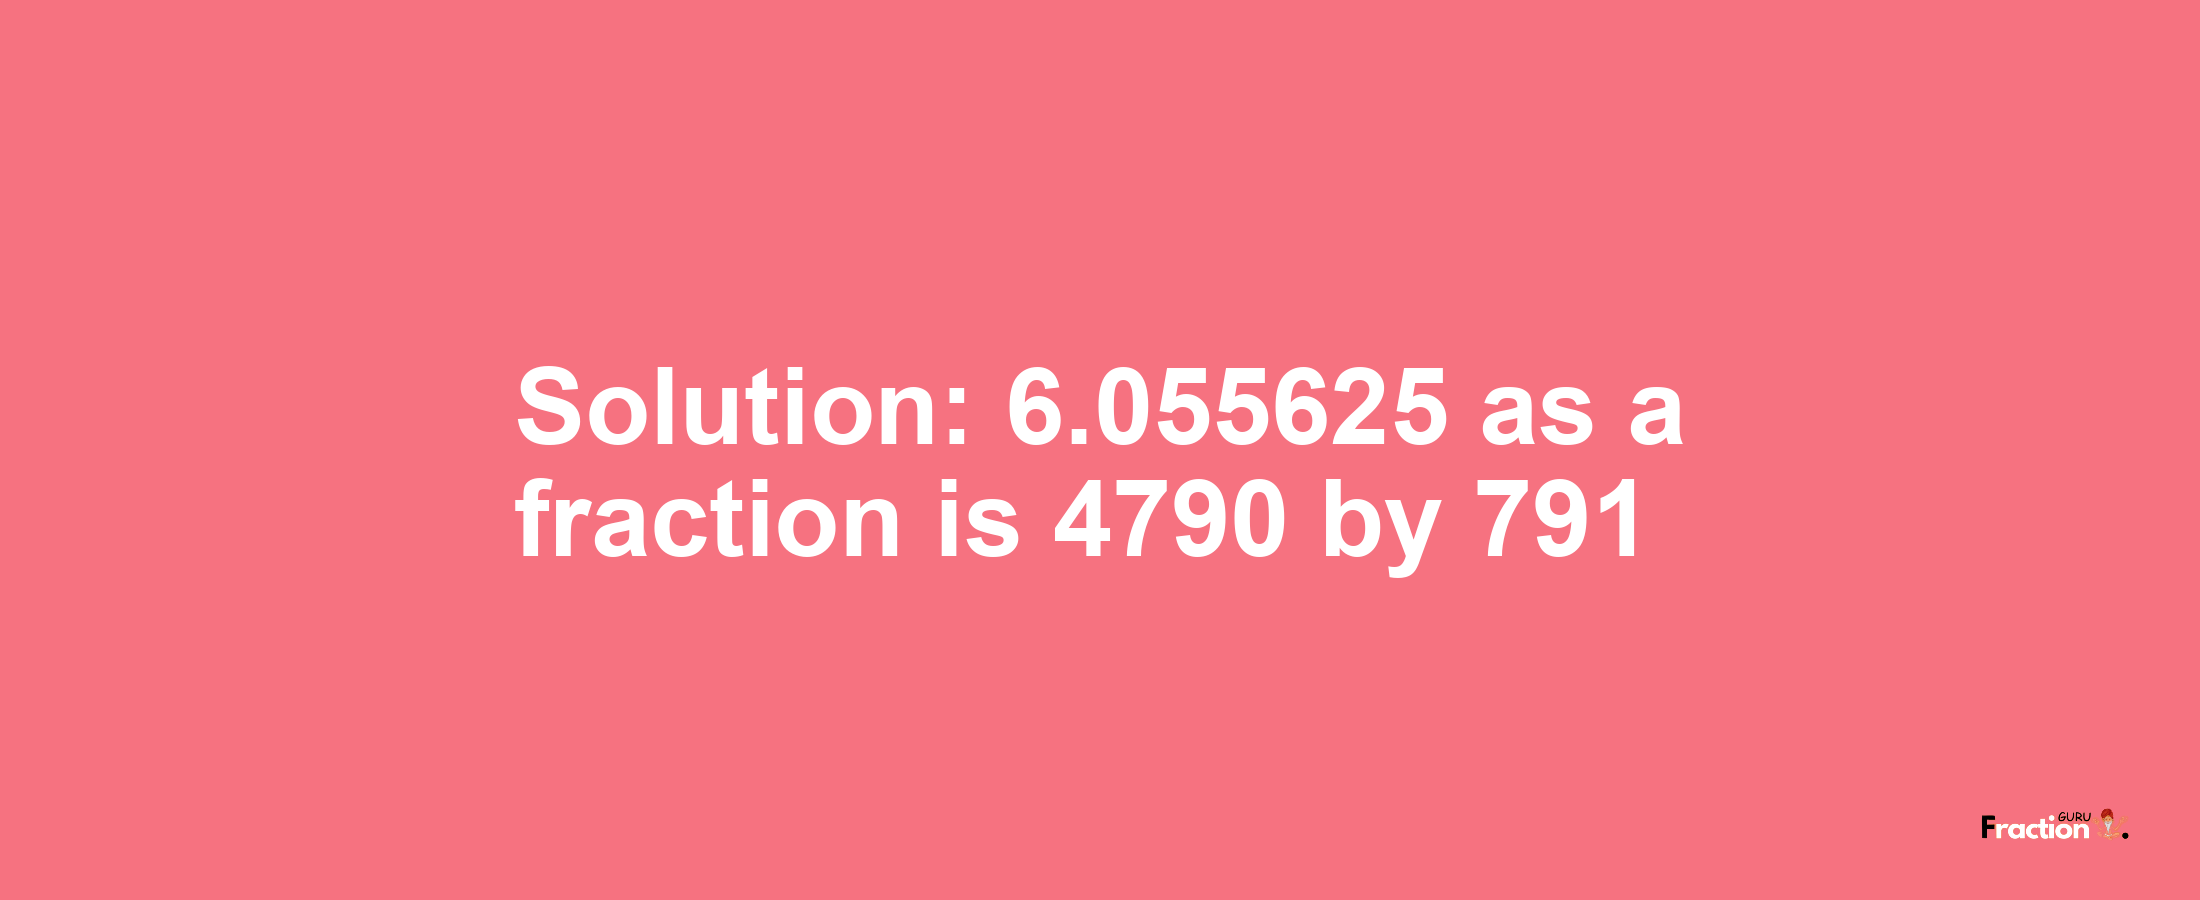 Solution:6.055625 as a fraction is 4790/791